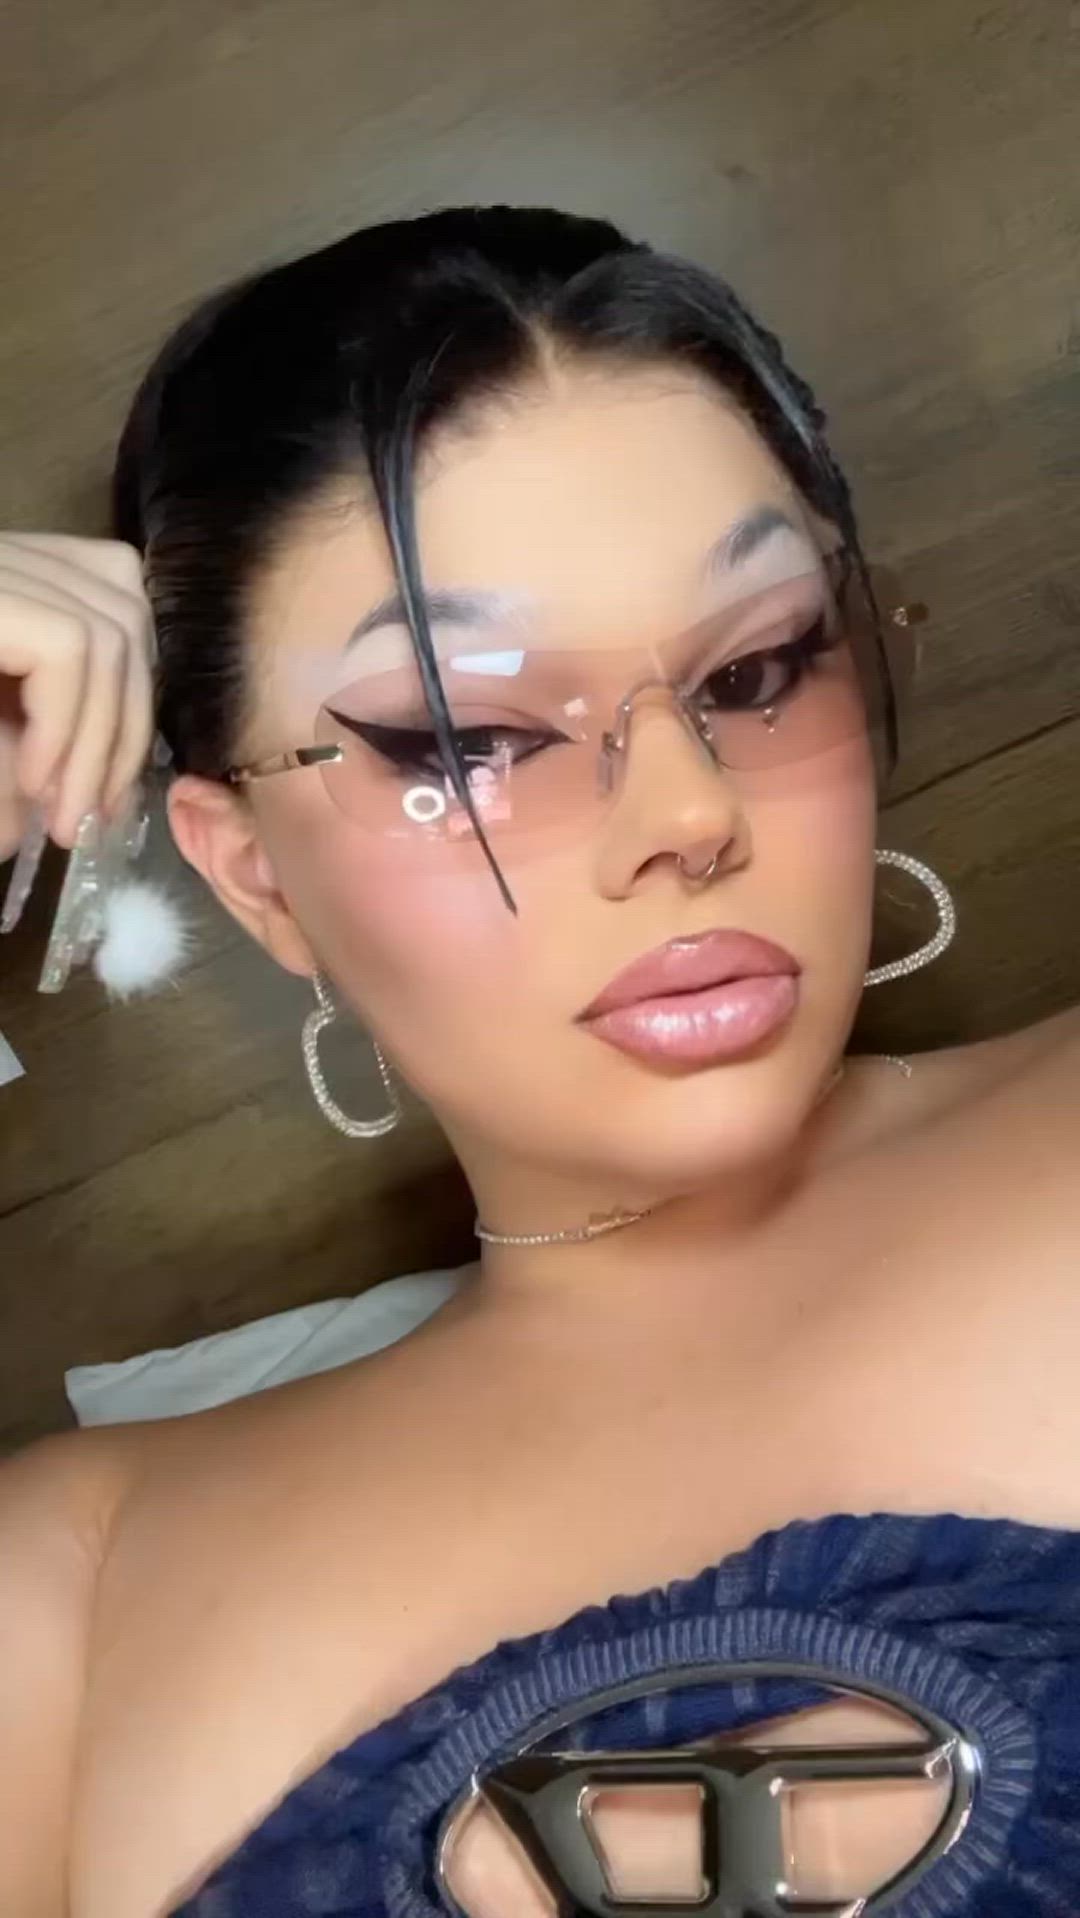 Blowjob porn video with onlyfans model tslali <strong>@laliroll</strong>